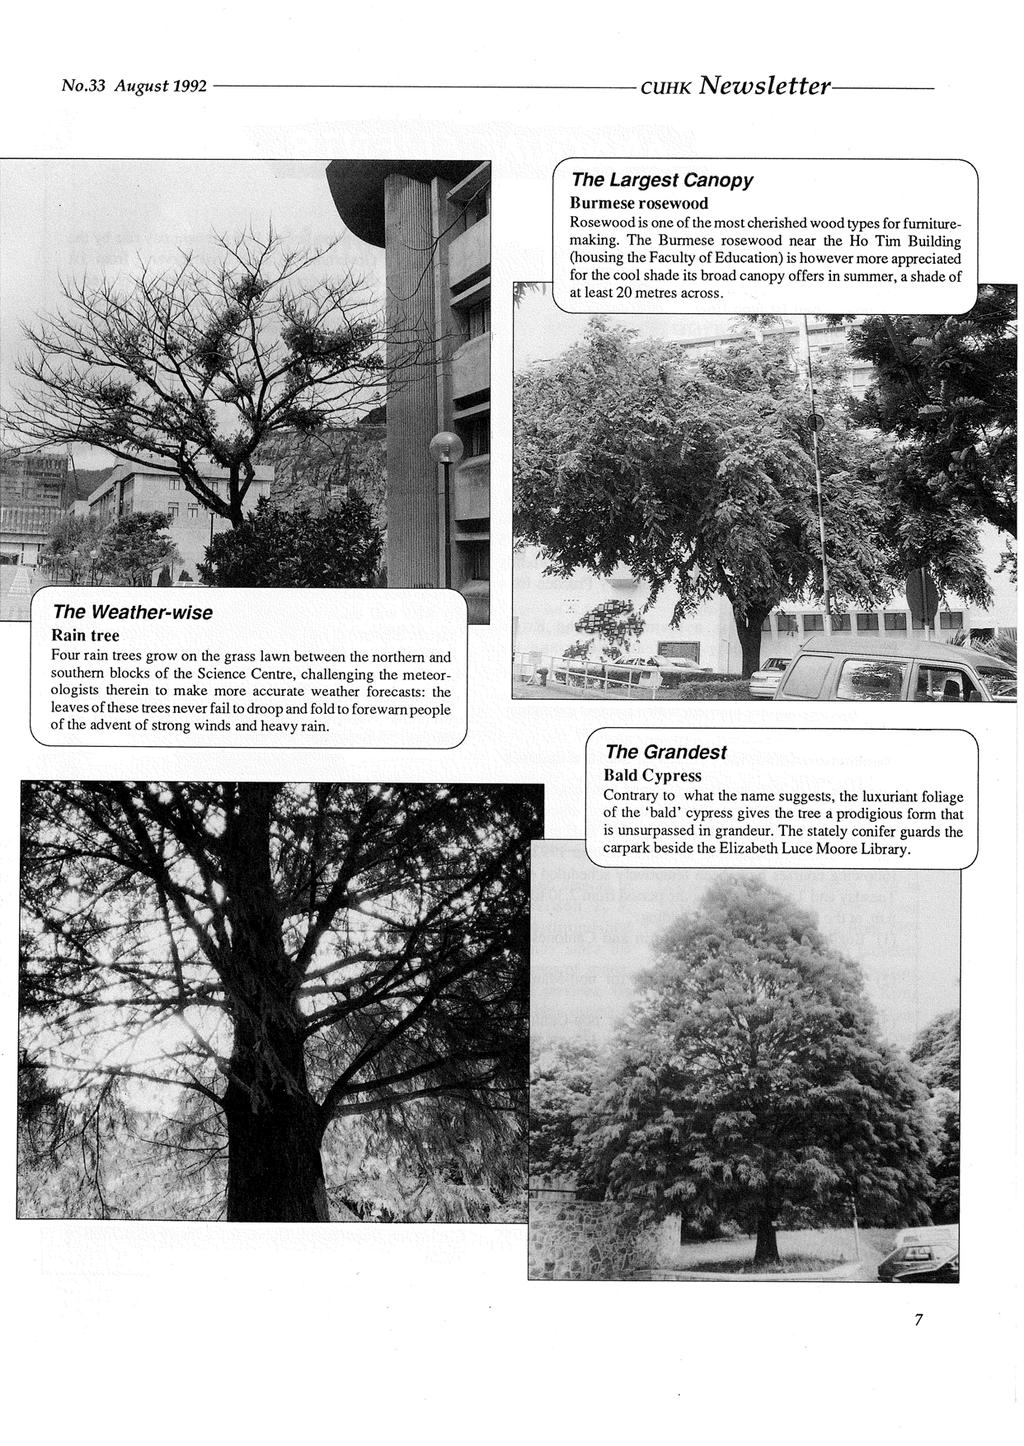 No33 August 1992 CUHK Newsletter The Largest Canopy Burmese rosewood Rosewood is one of the most cherished wood types for furnituremaking.